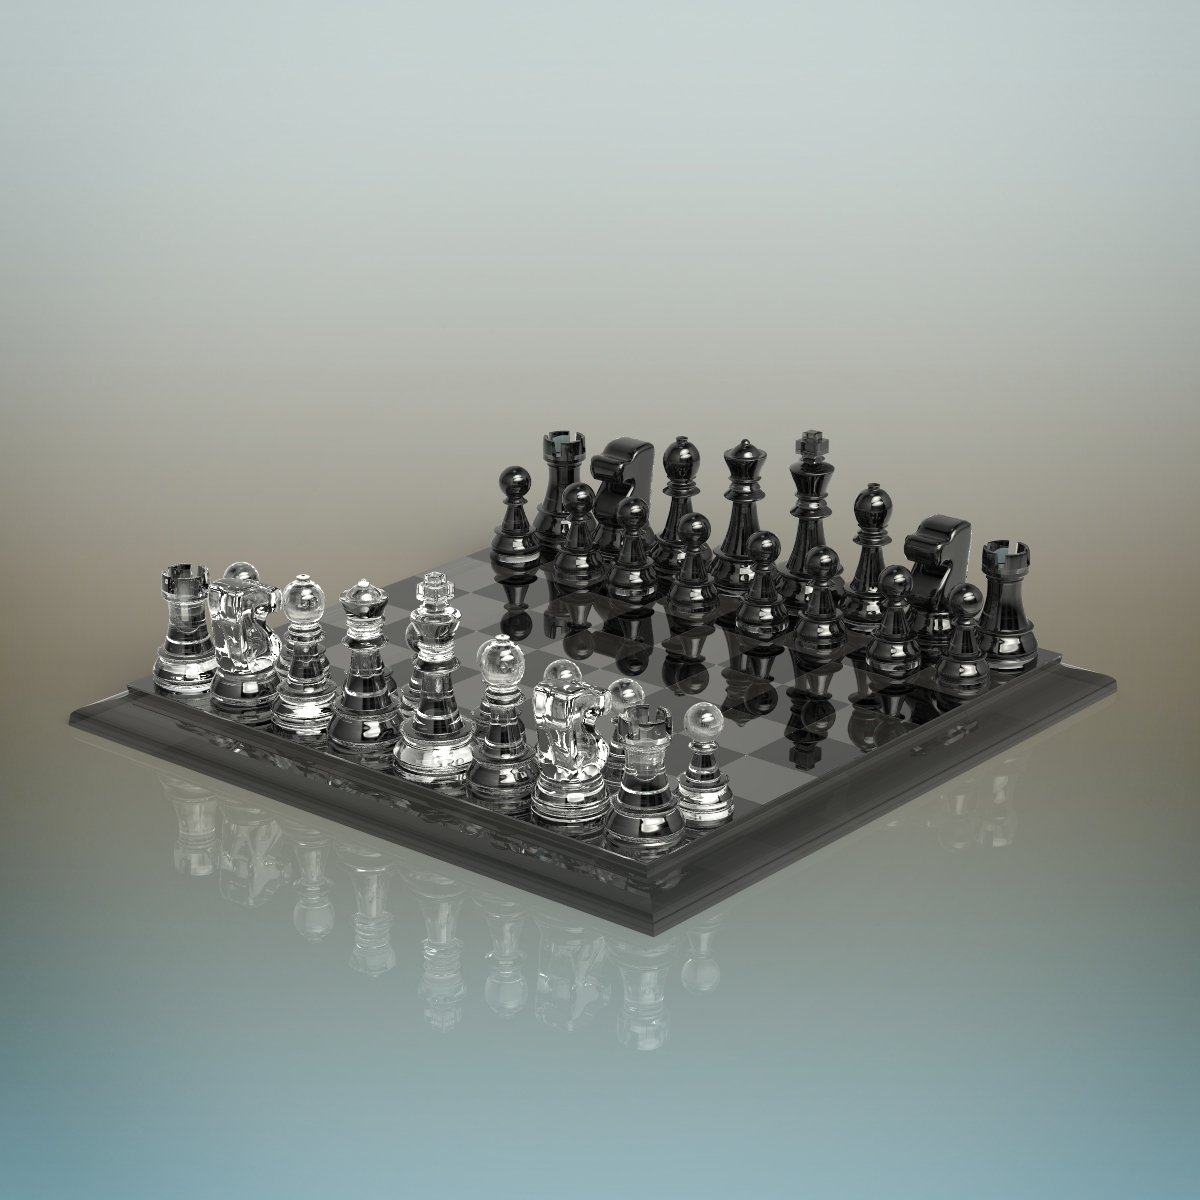 90,254 Queen Chess Piece Images, Stock Photos, 3D objects